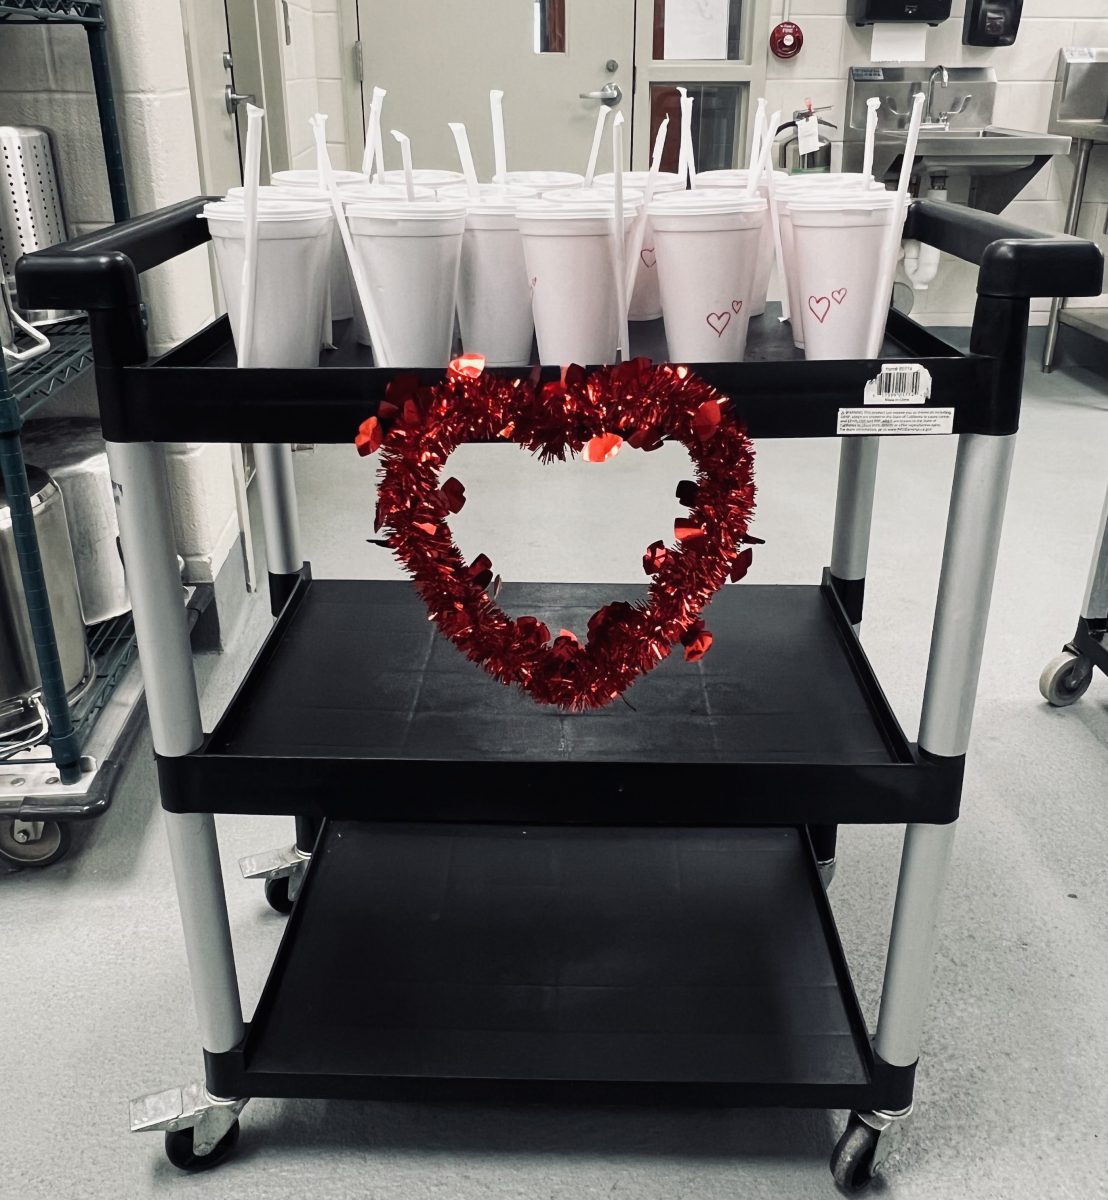 Culinarys sweet tea cart, decked out for Valentines Day. Photo courtesy of Camille Bradshaw.